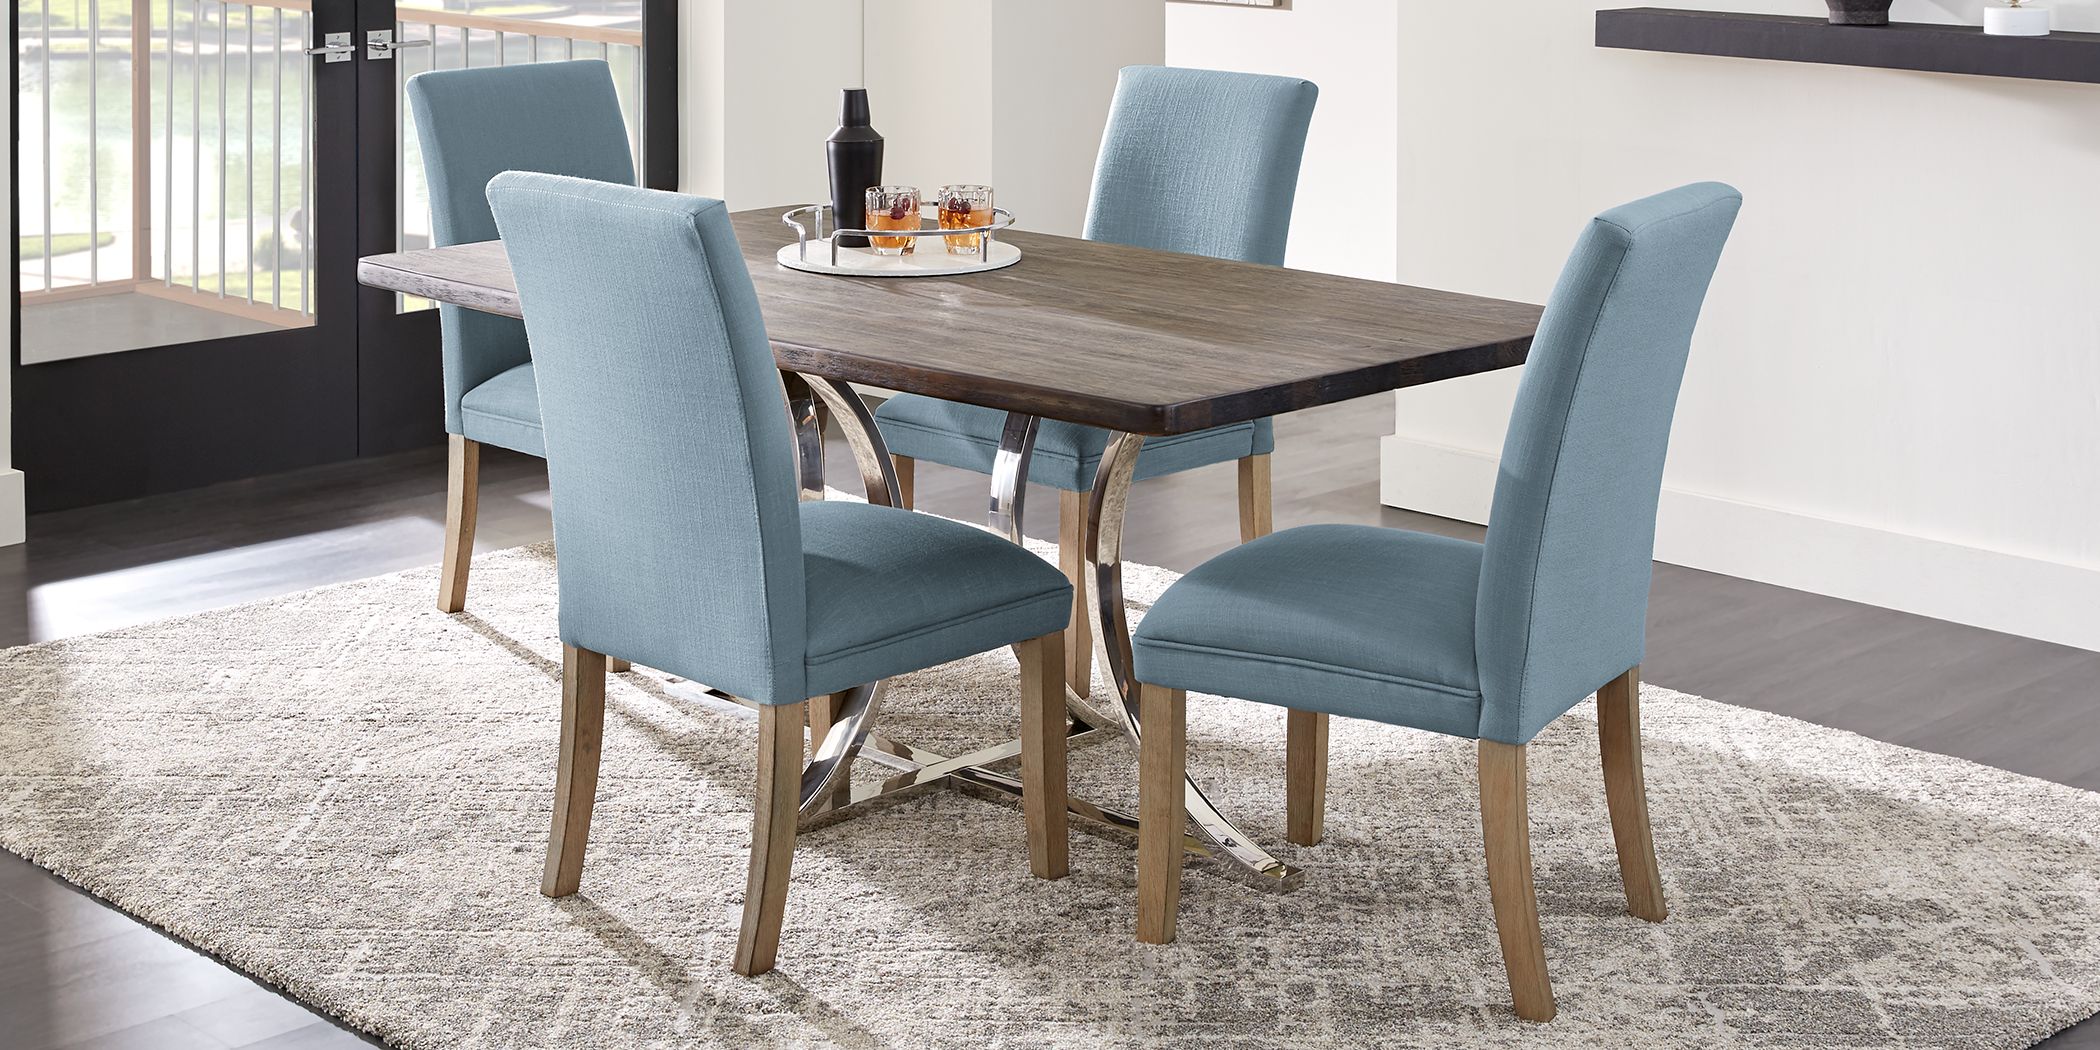 Arland Dark Brown 5 Pc Rectangle Dining Room with Blue Chairs